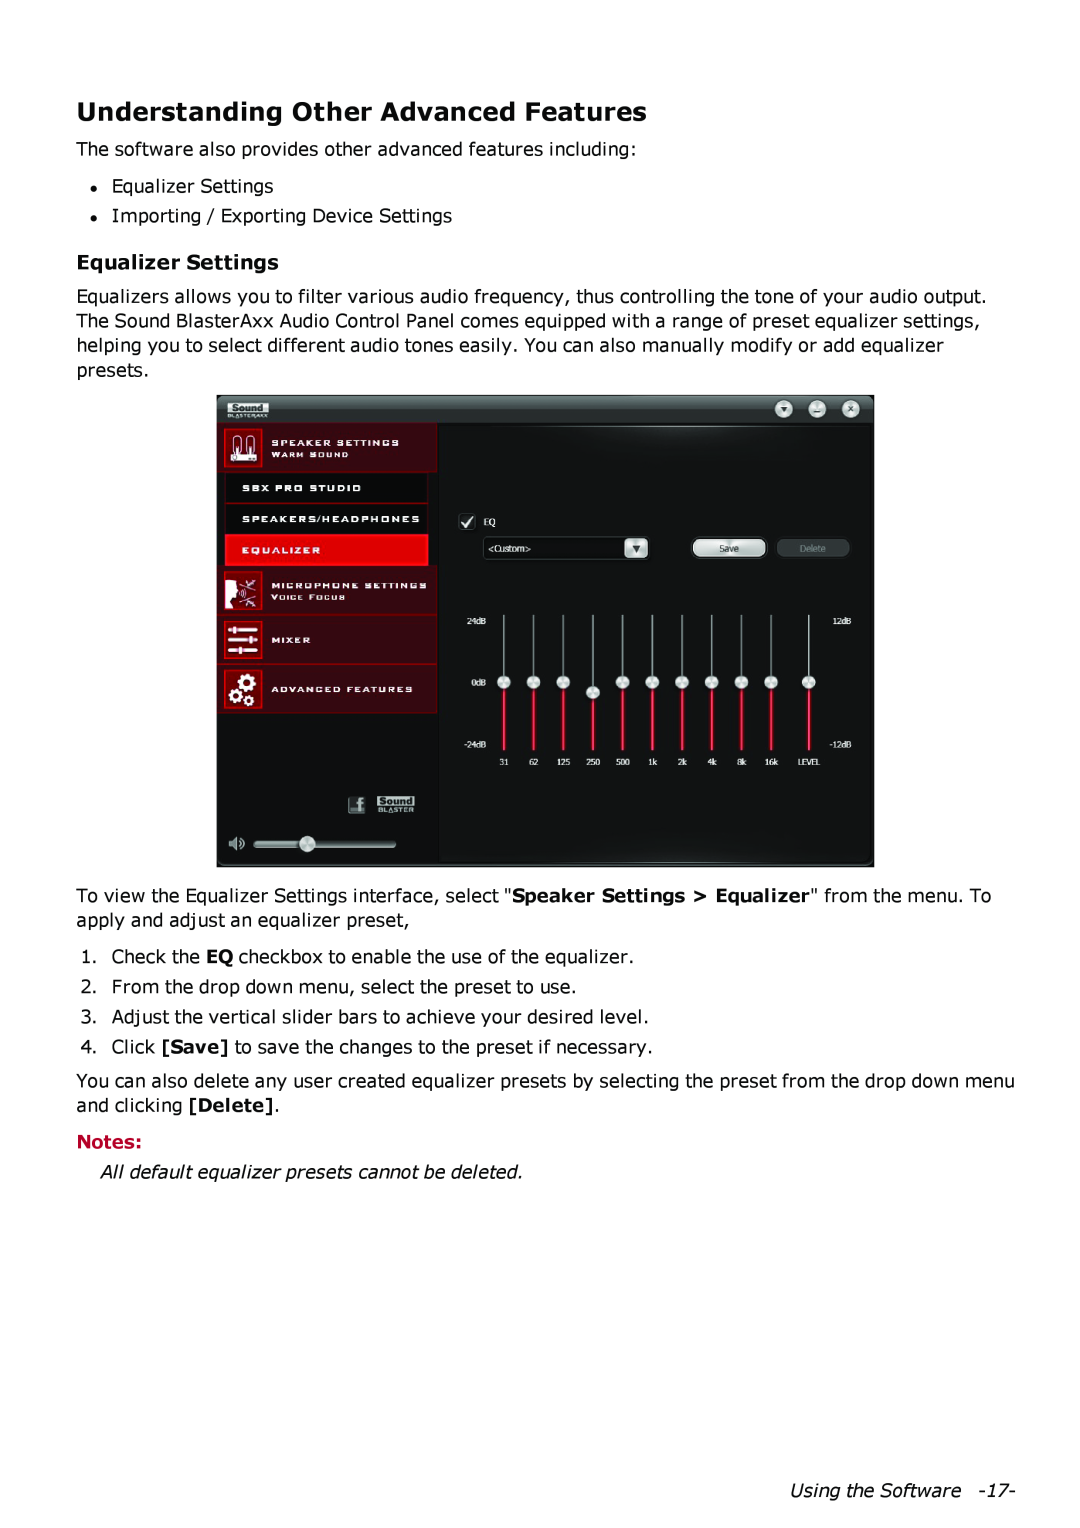 Creative SB1380 manual Understanding Other Advanced Features, Equalizer Settings 